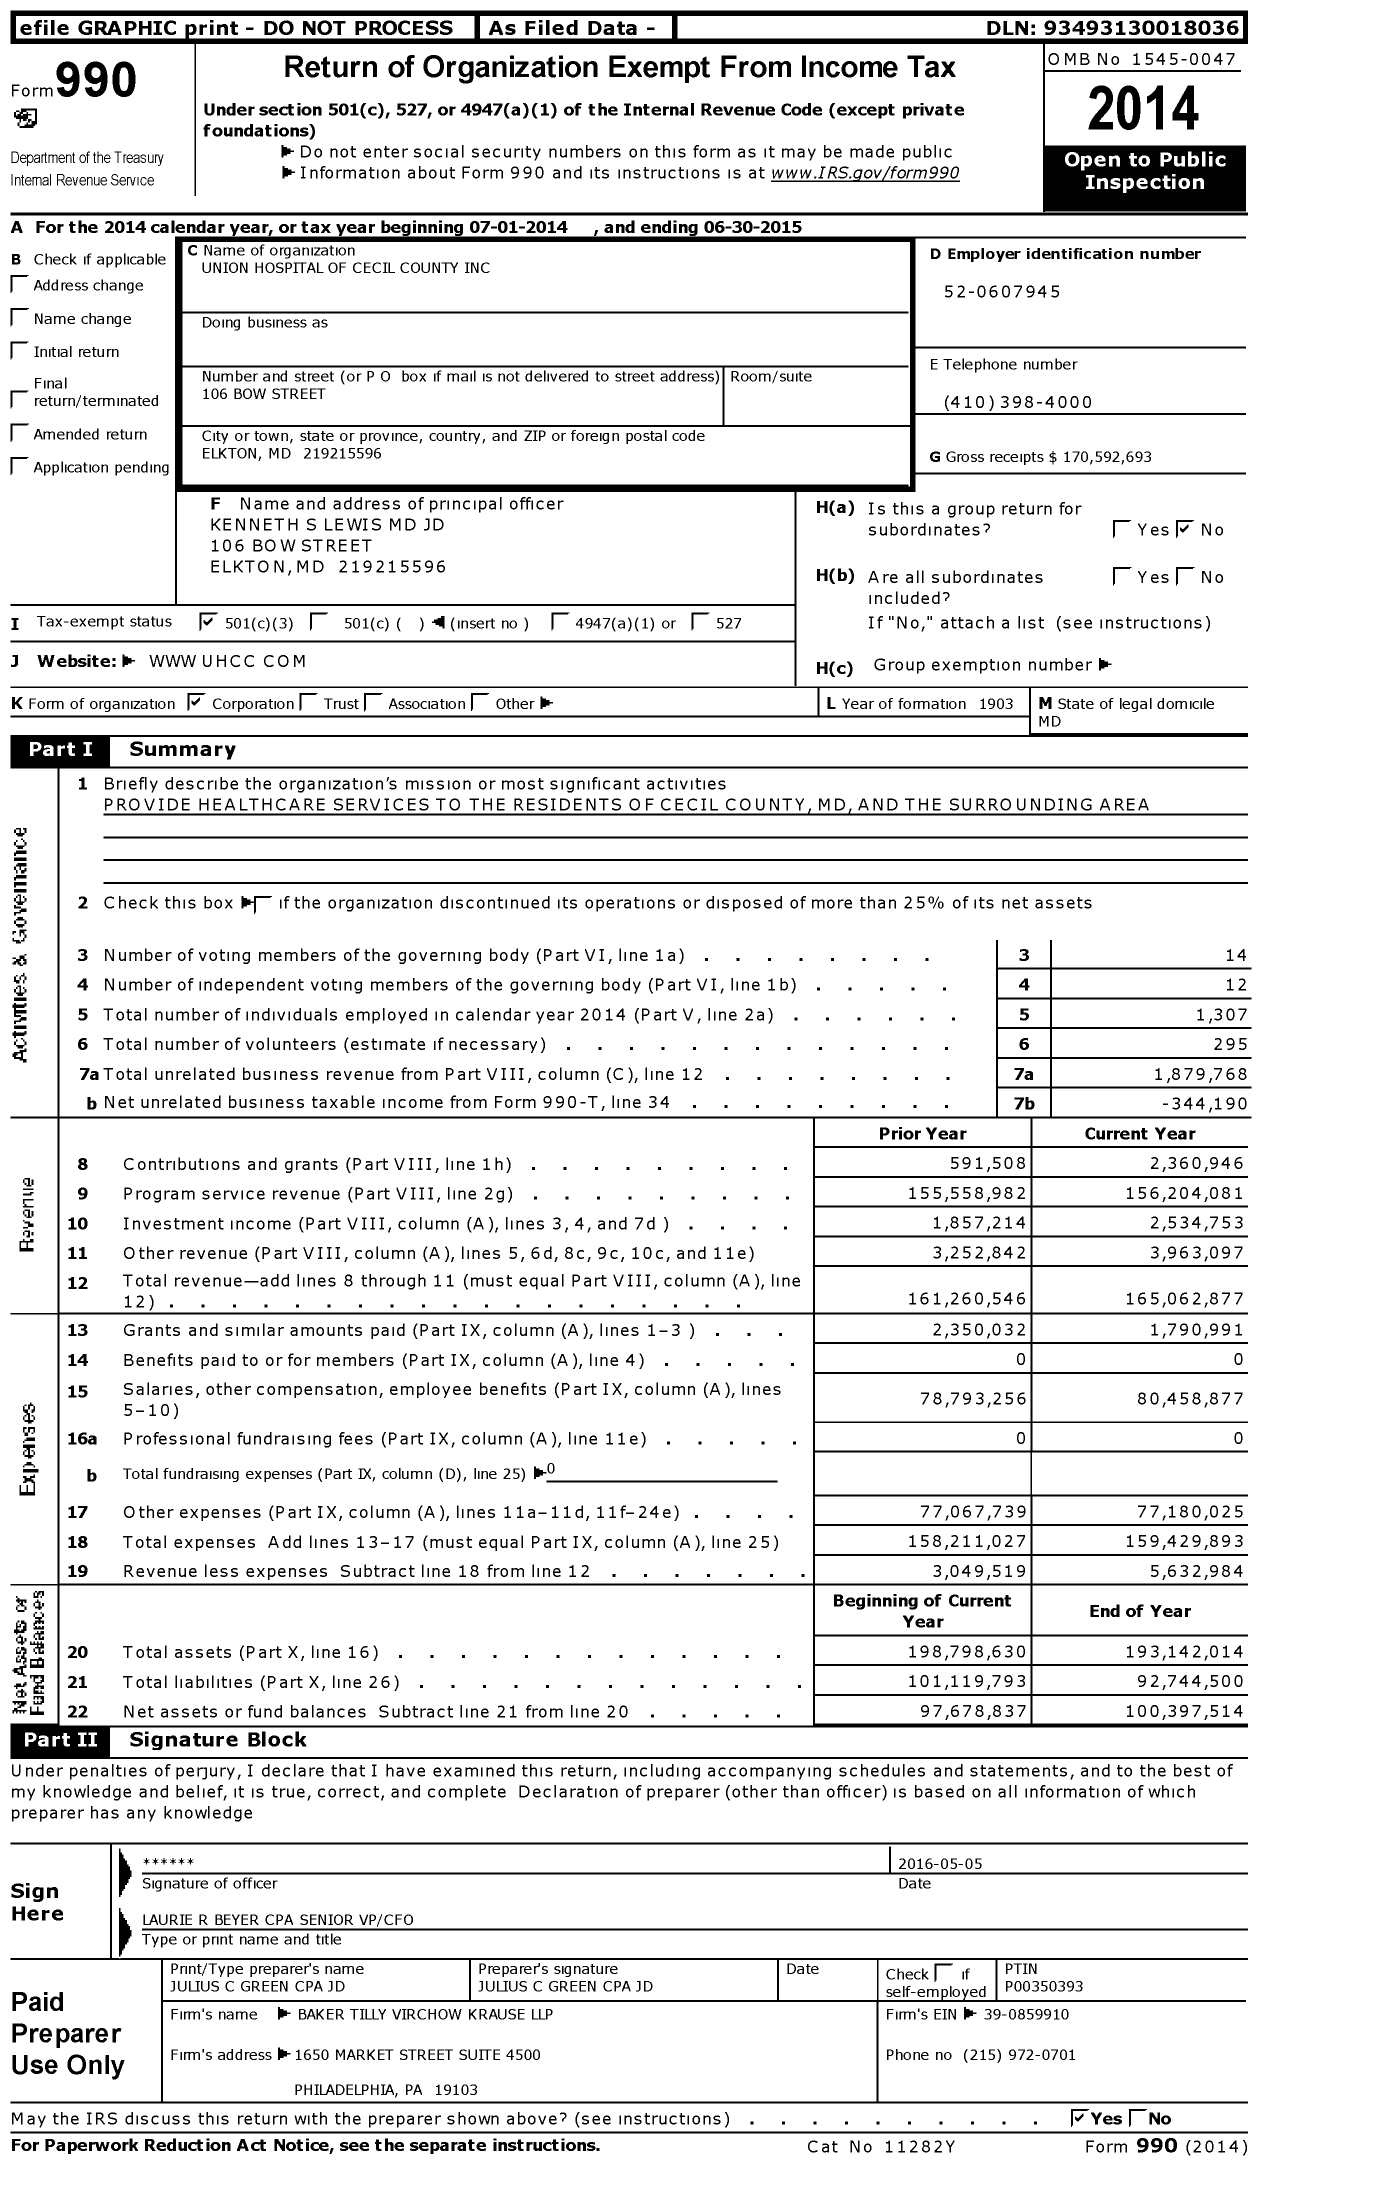 Image of first page of 2014 Form 990 for Union Hospital of Cecil County (UHCC)